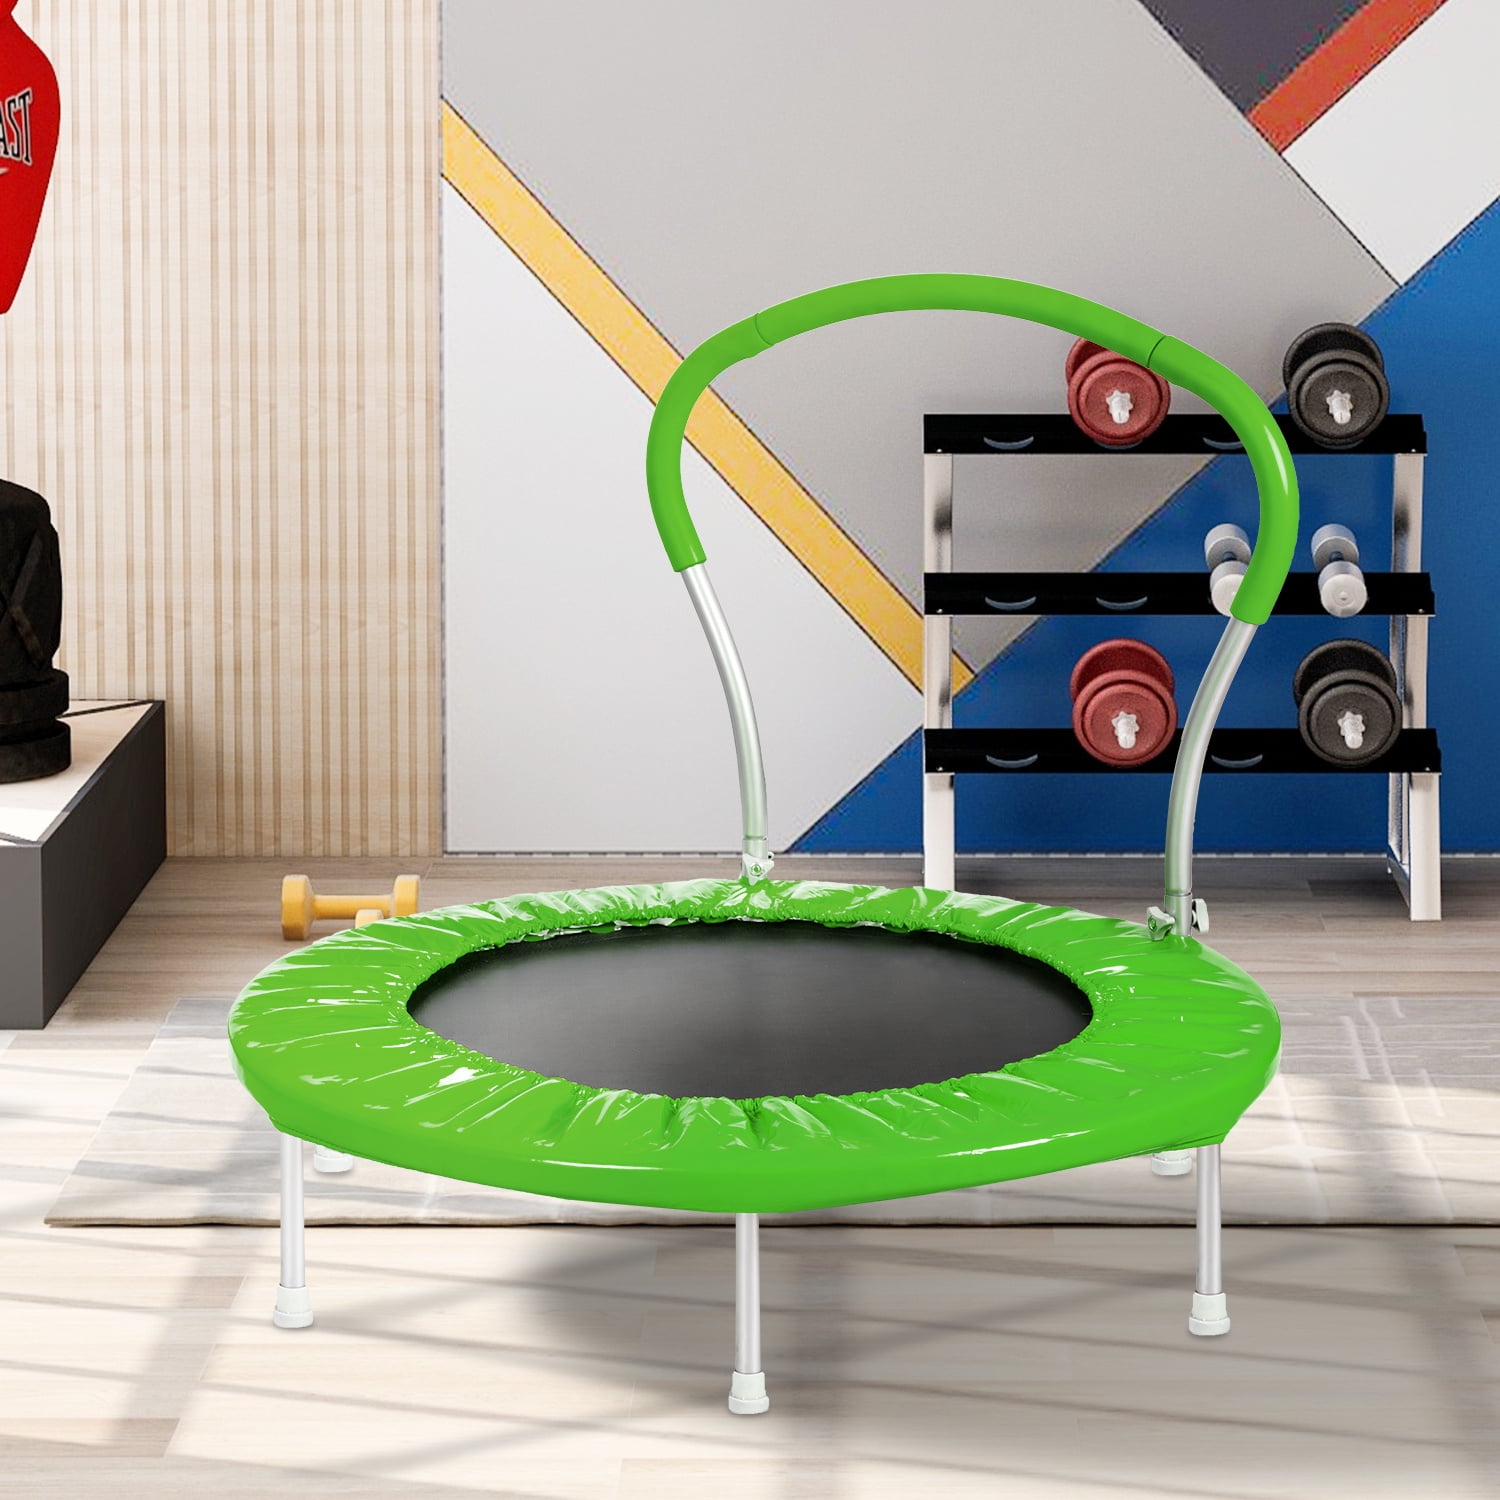 36" Kids Mini Trampoline with Handle,Small Trampoline with Safety Padded Cover,Sturdy Frame,Indoor & Outdoor(Green)